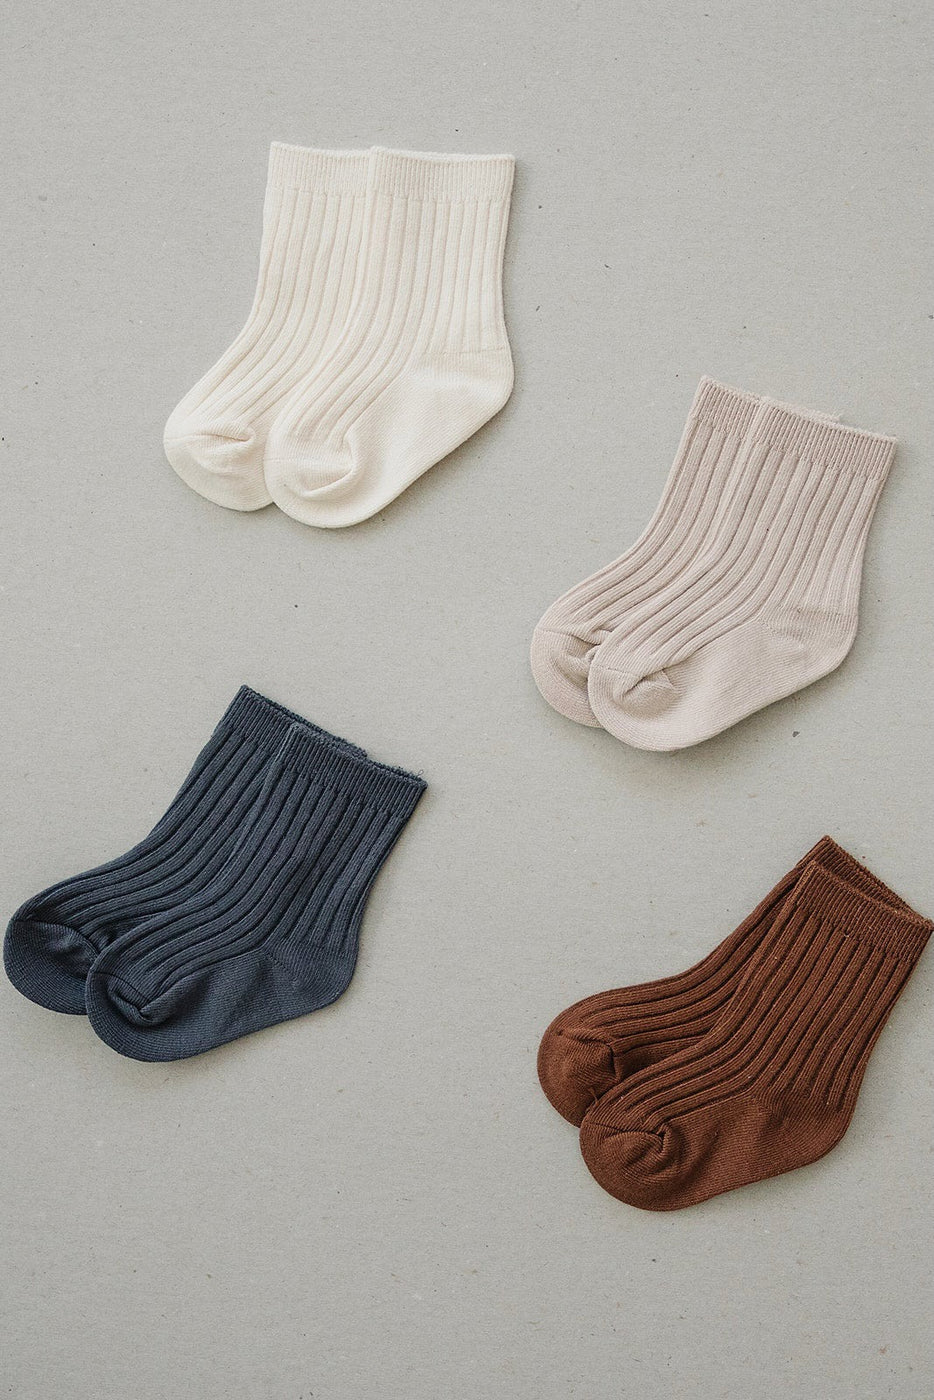 a group of socks on a white surface